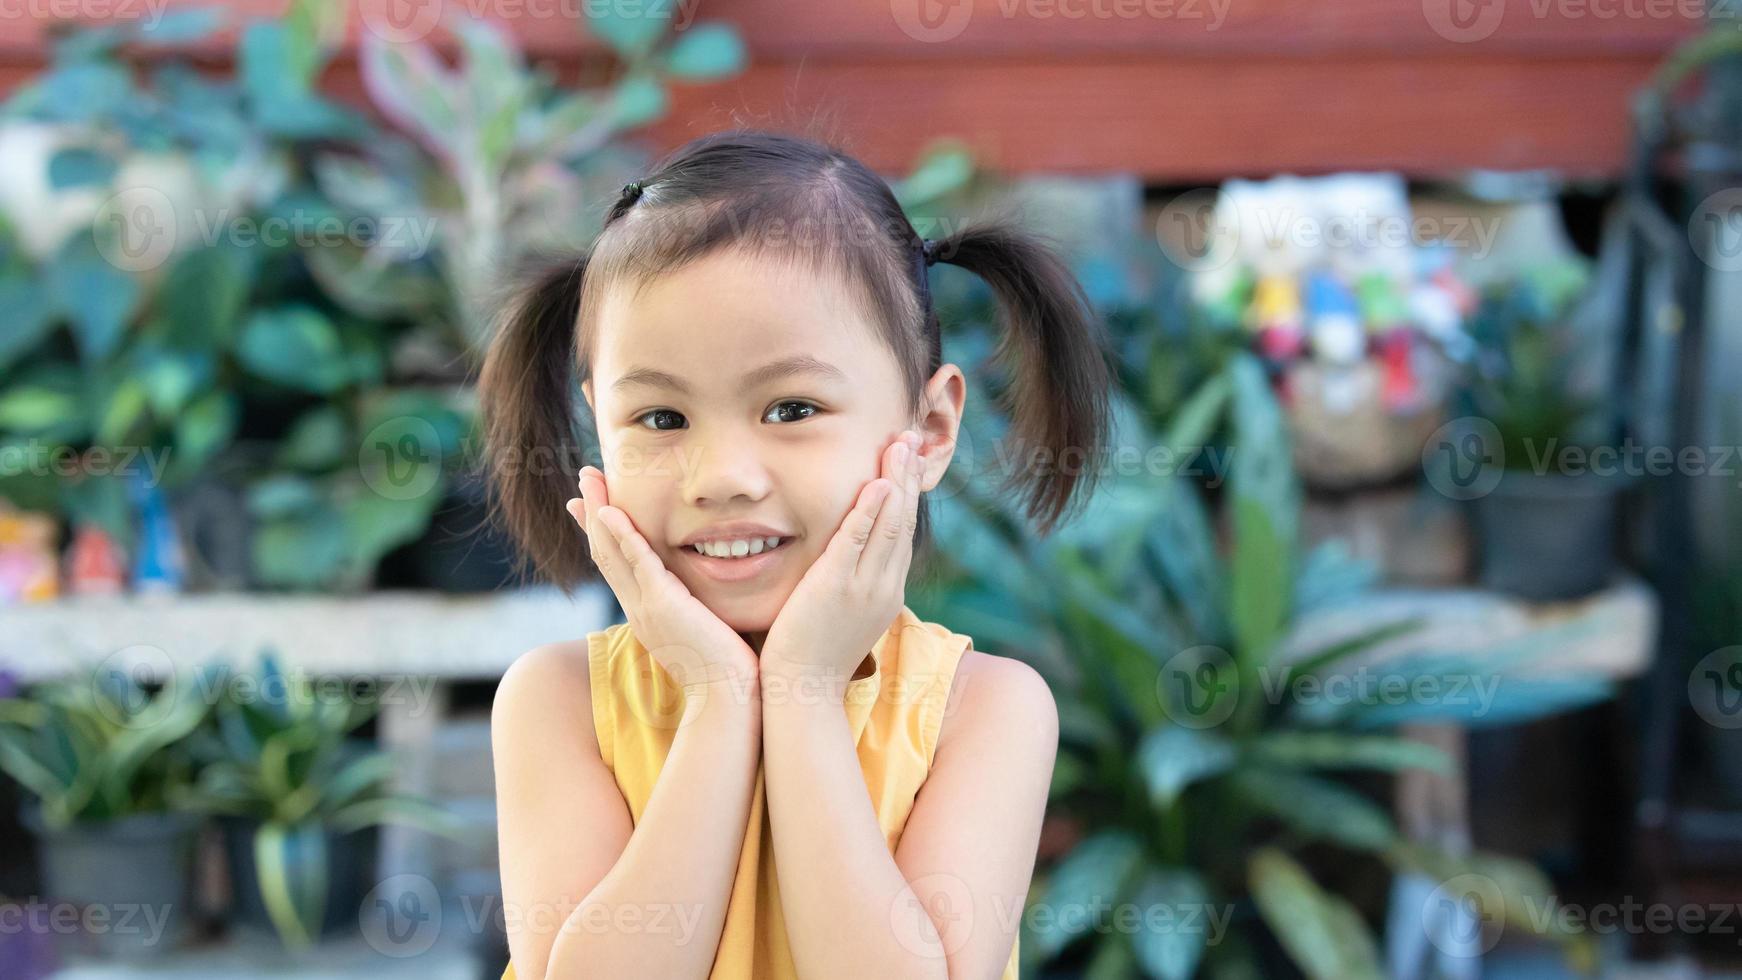 Positive charming 4 years old cute baby Asian girl, little preschooler child with adorable pigtails hair smiling looking at camera photo